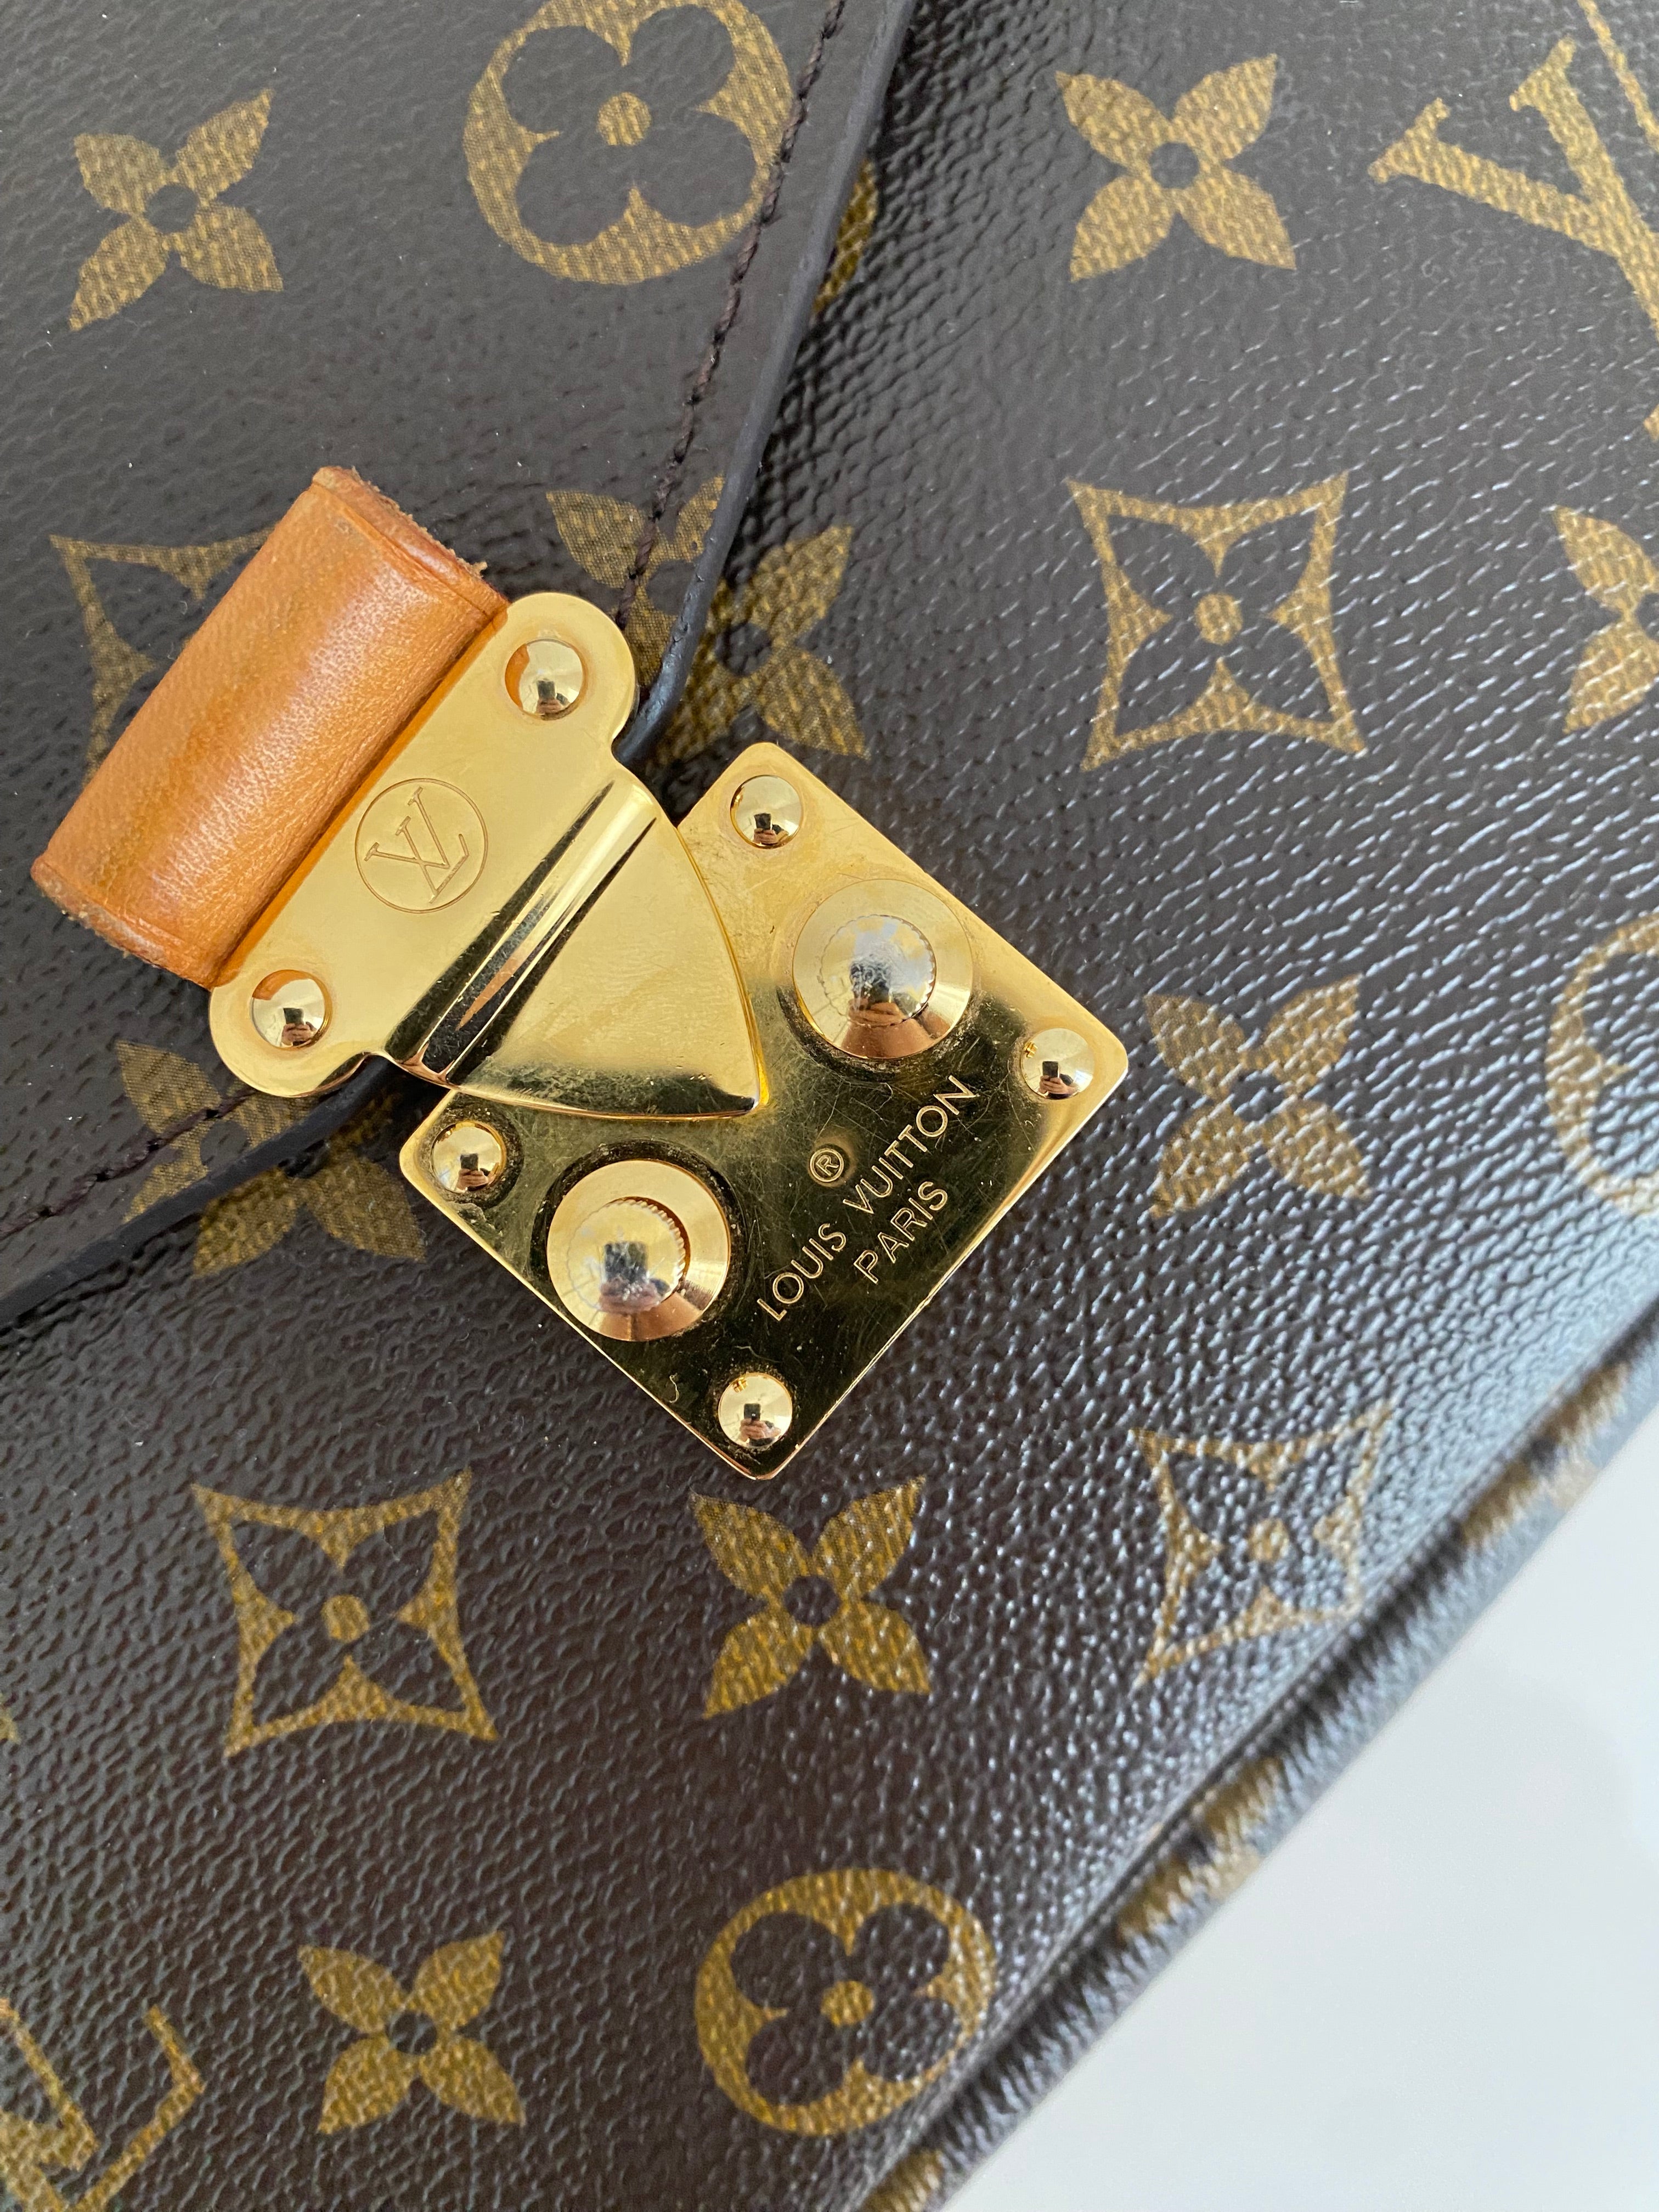 the most ludicrously capacious bag, the Louis Vuitton Pochette